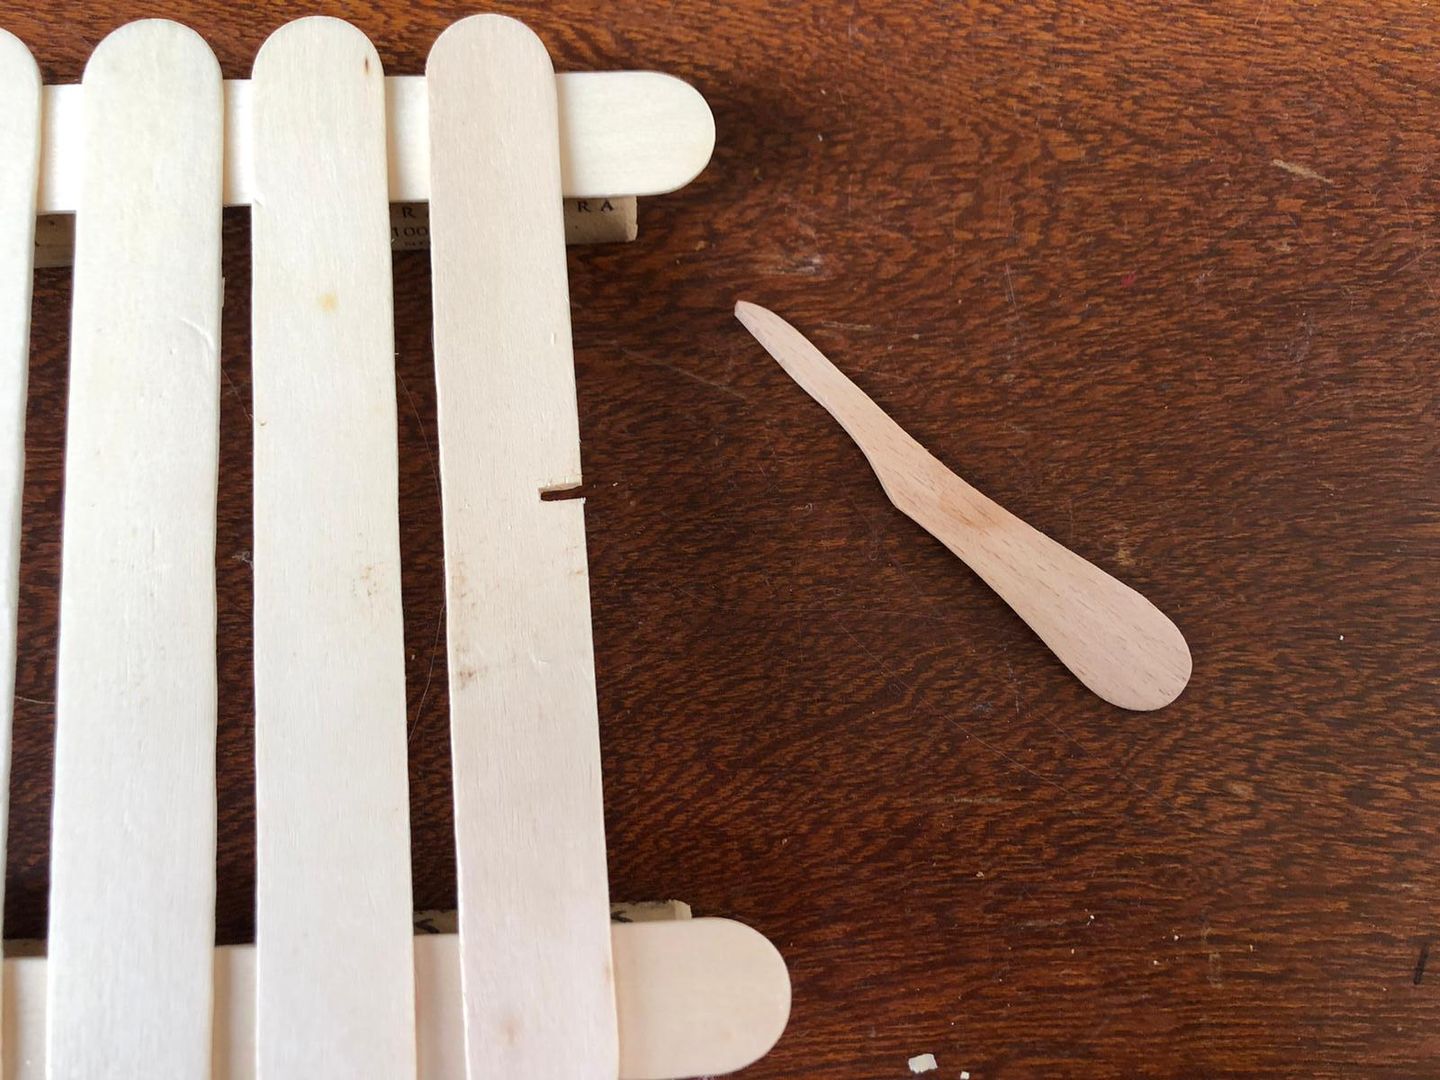 How to Make Popsicle Crafts for Kids: A Sailboat in 22 Steps